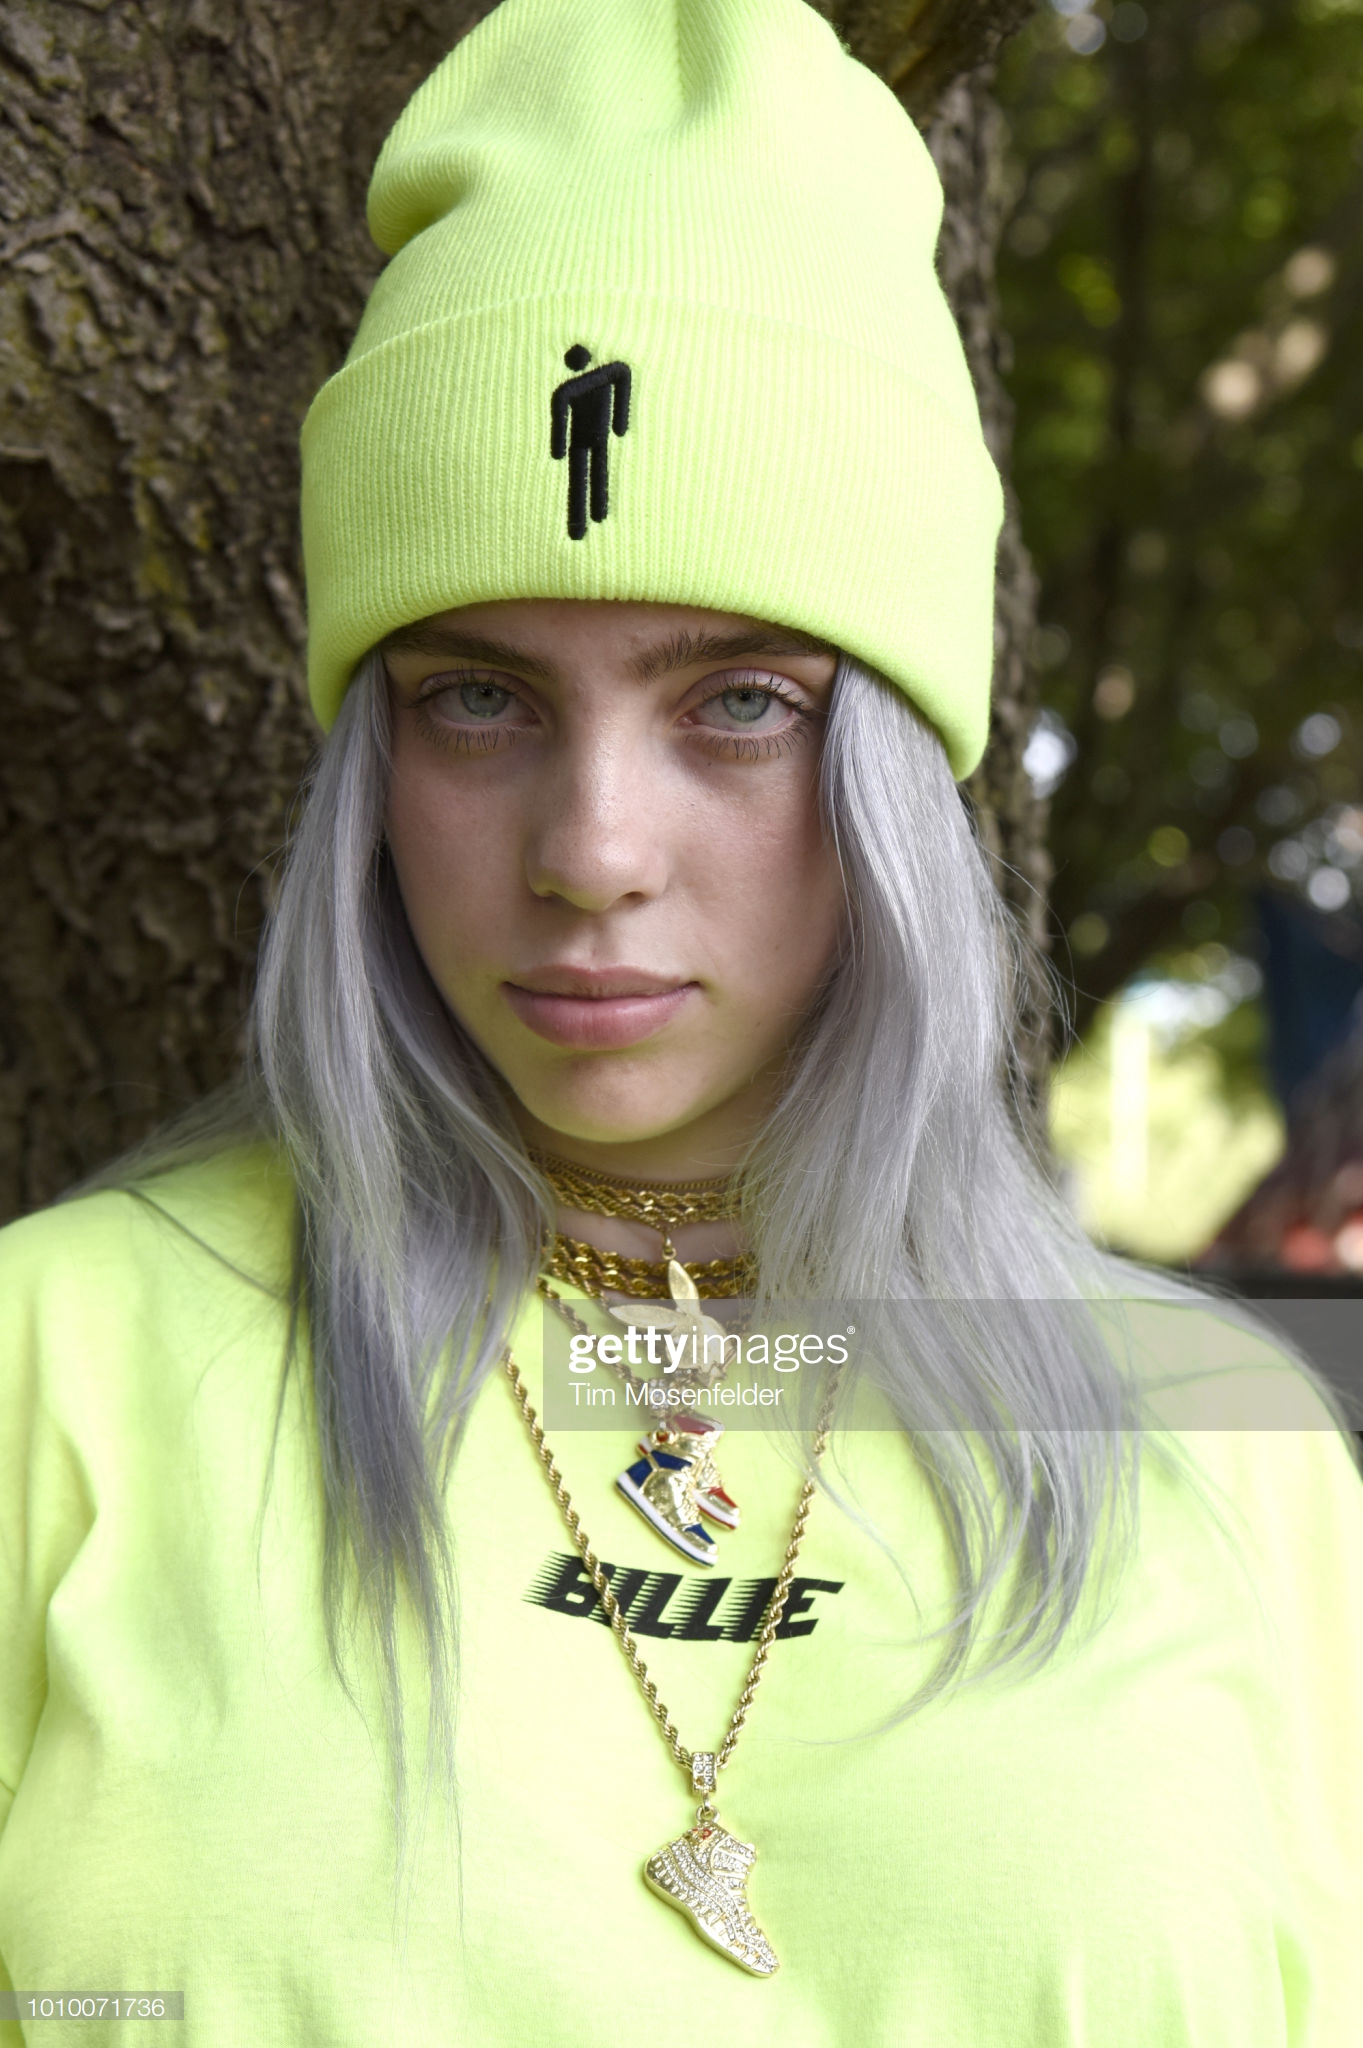 gettyimages-1010071736-2048x2048.jpg